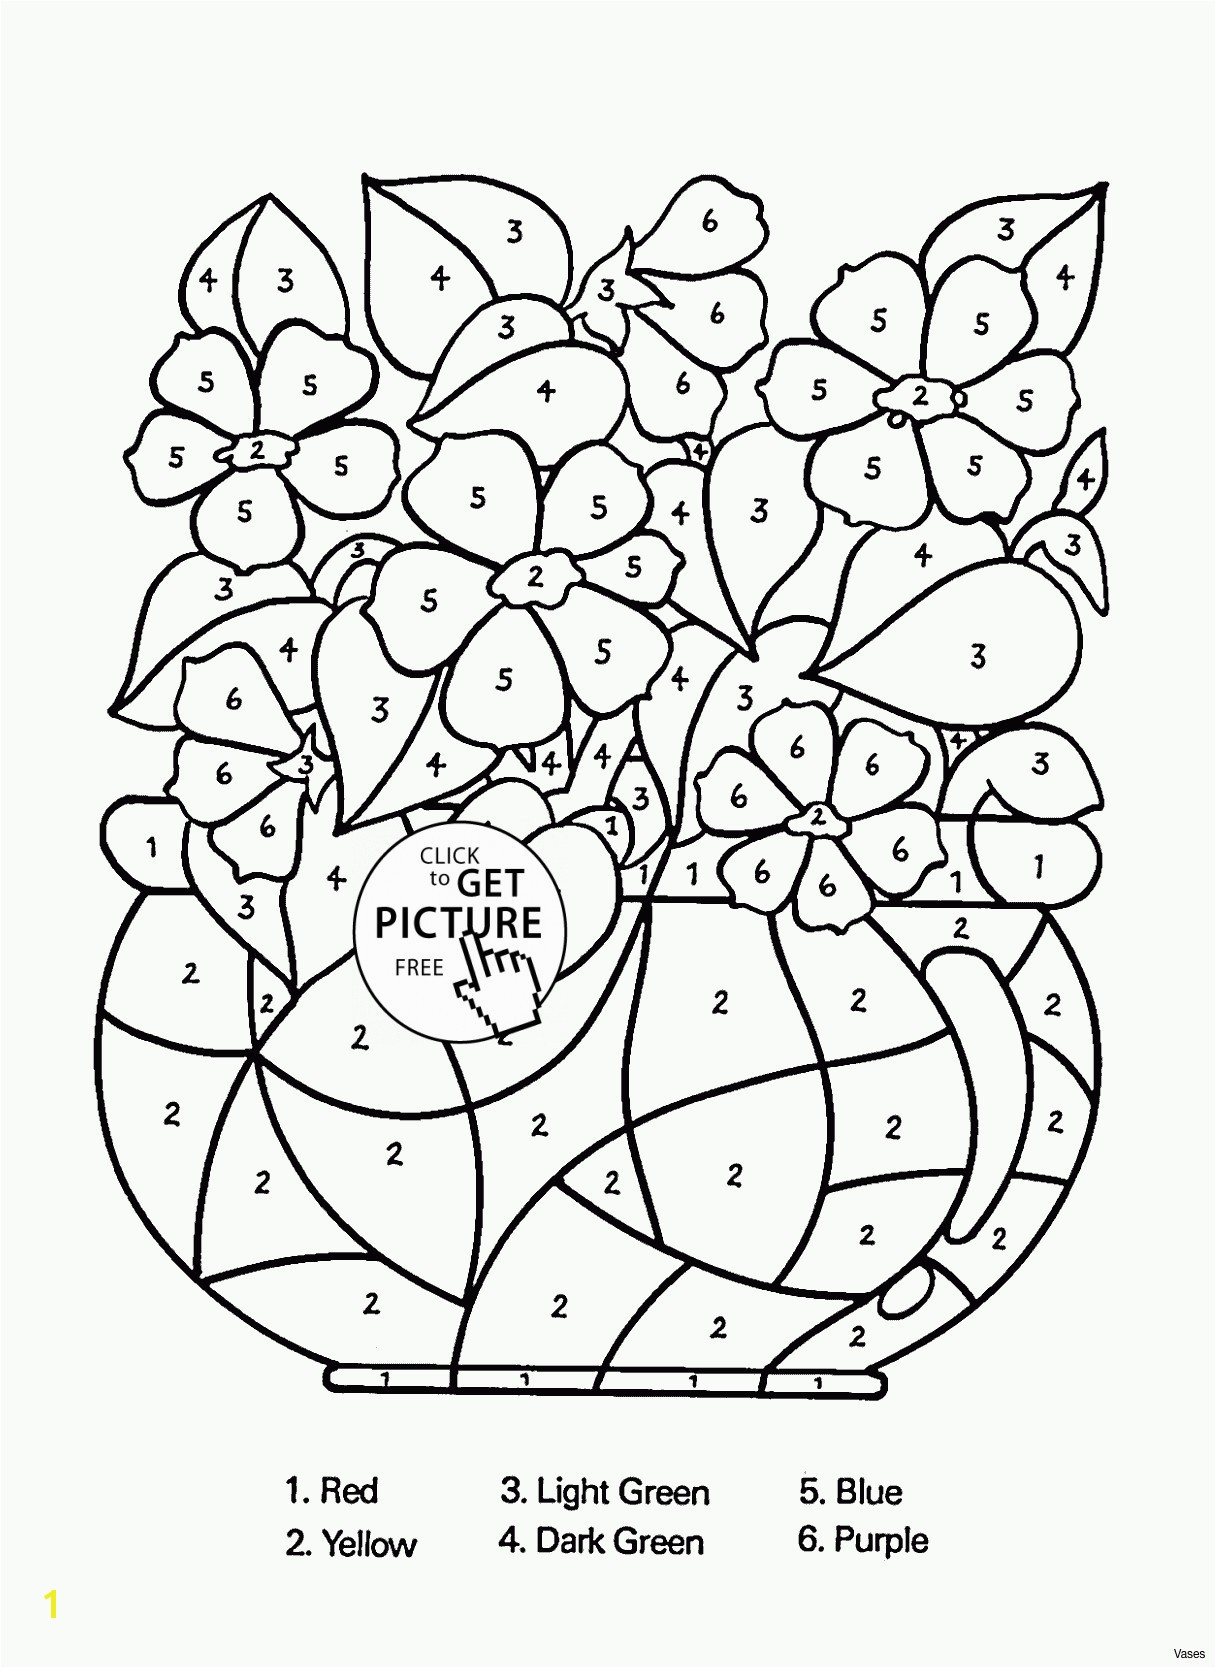 Coloring Pages Showing Respect Coloring Pages Showing Respect Awesome Cool Vases Flower Vase